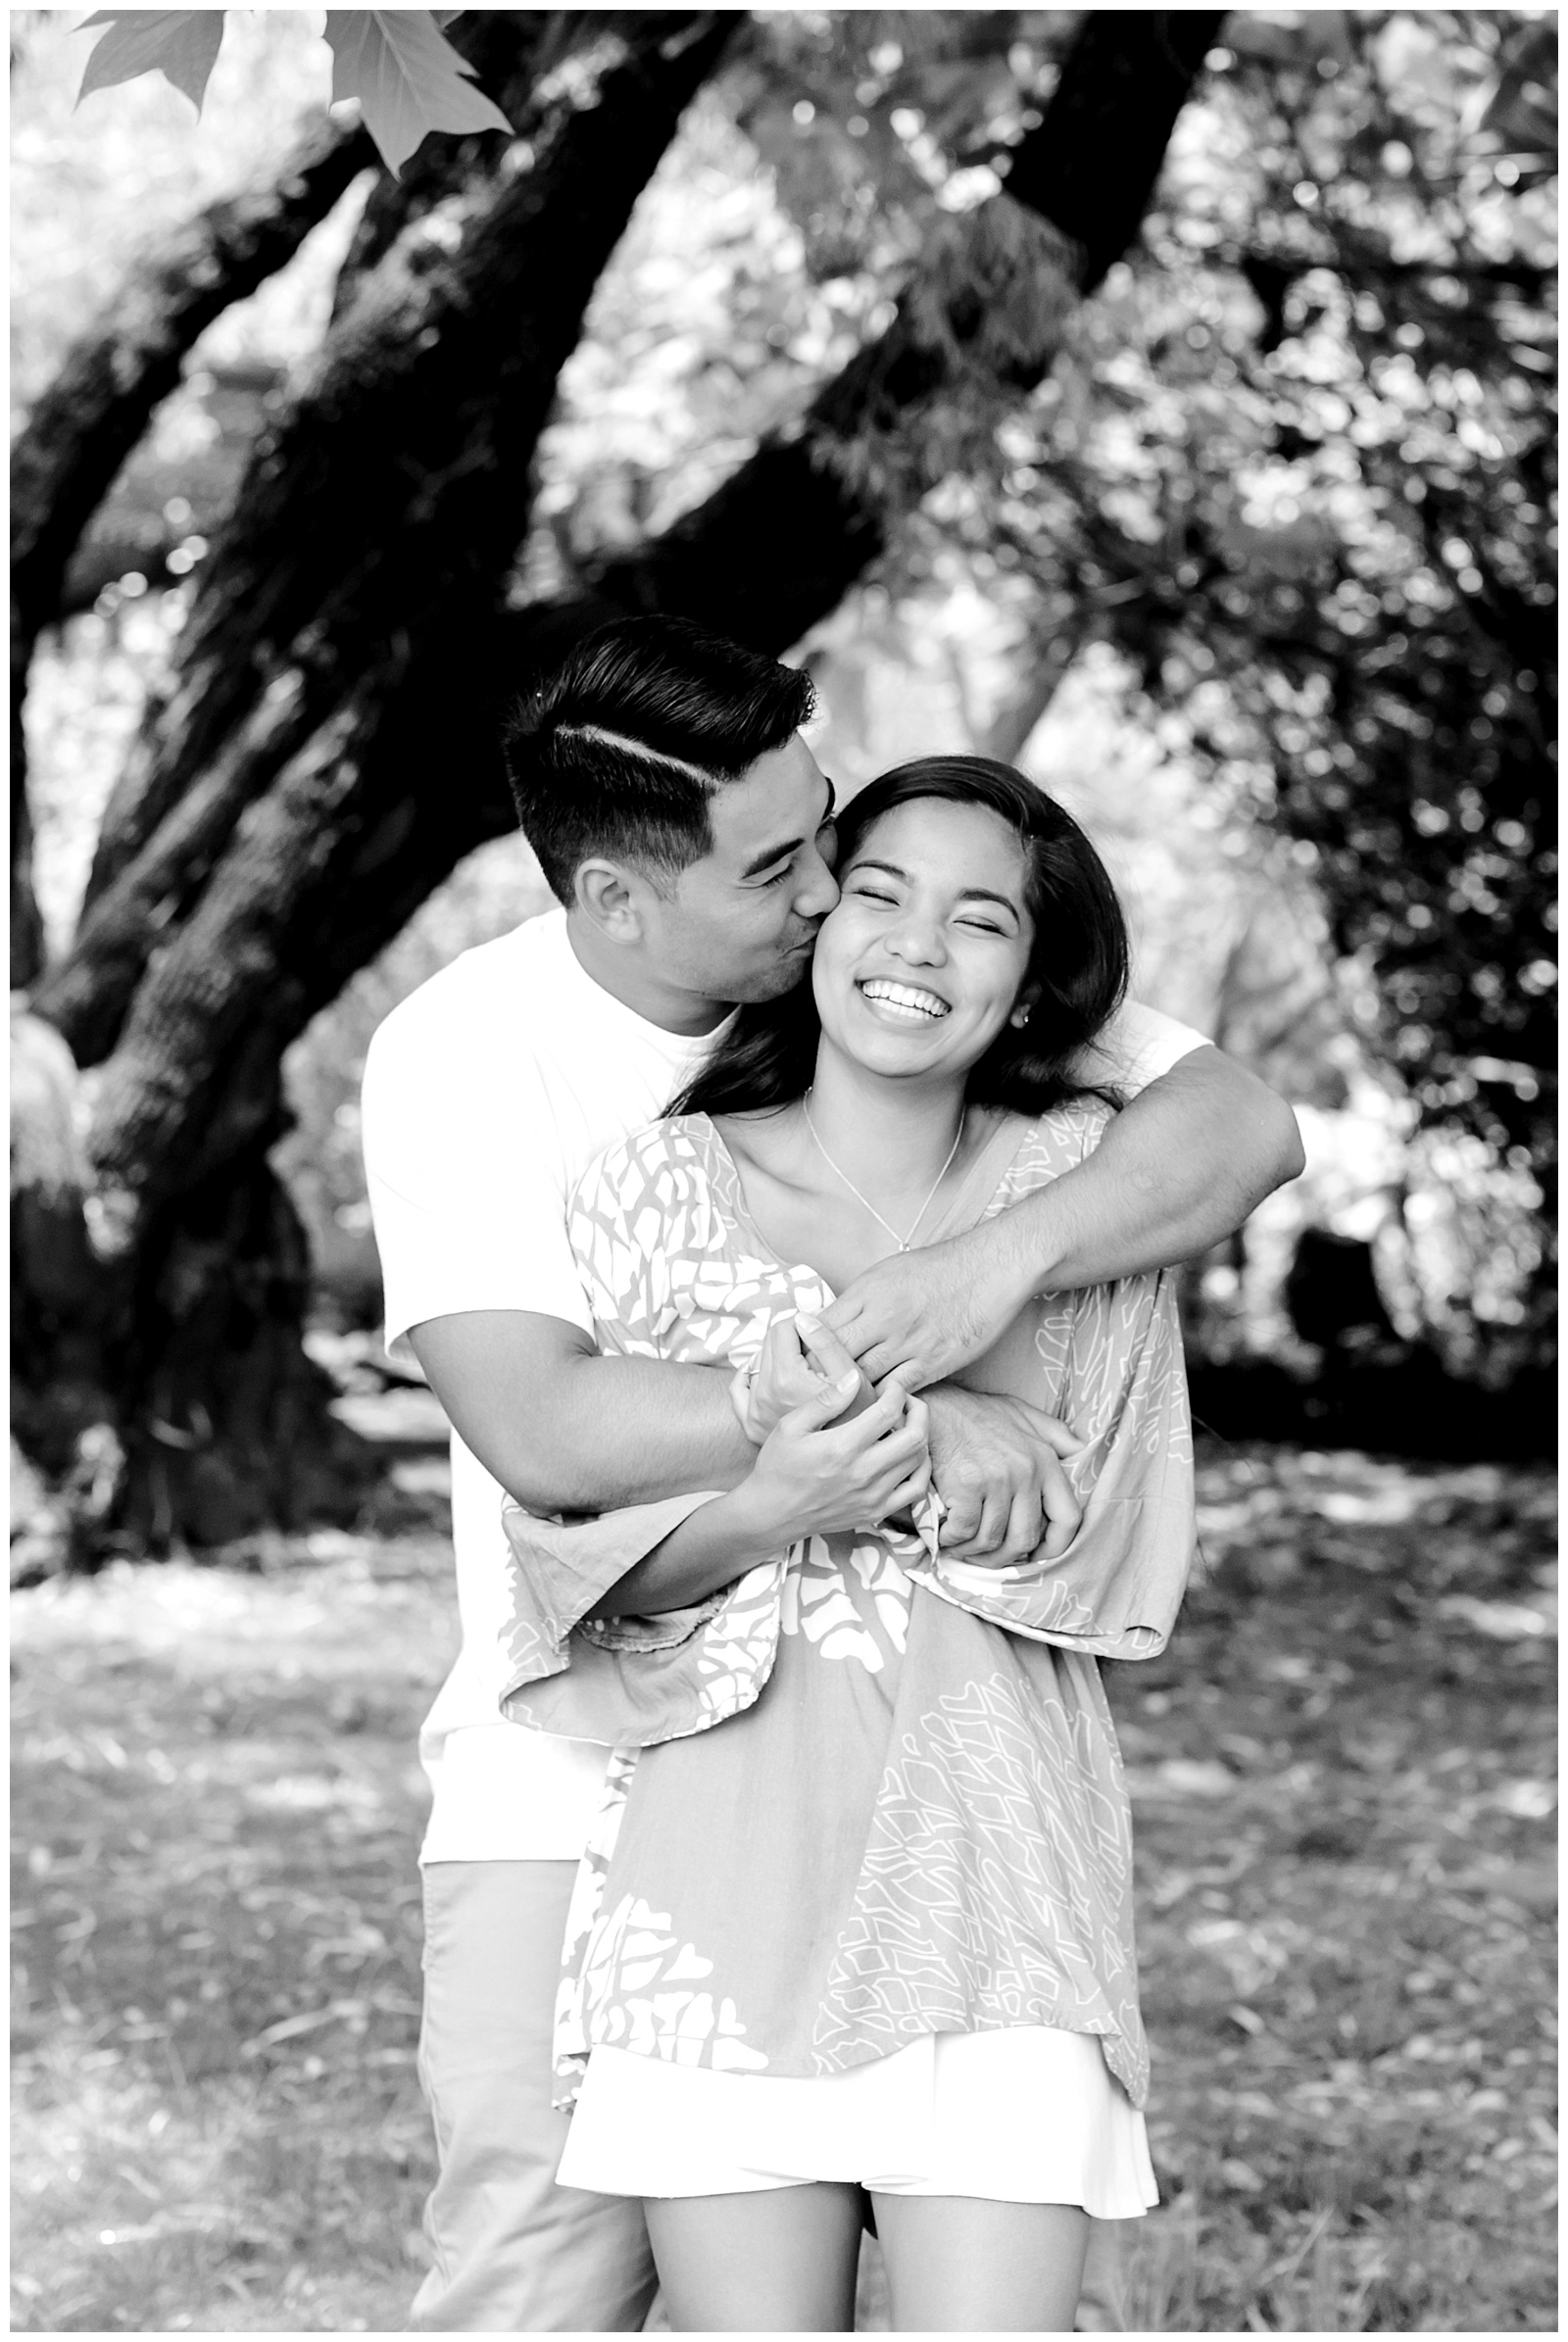 Black and white photo of male hugging his fiance from behind under a tree in Maui Hawaii Engagement Session-Kula Botanical Gardens Engagement - Ali'i Kula Lavendar Farm Engagement | Maui Hawaii and Destination, Engagement, Elopement and Wedding Photographer Monica Roberts Photography | www.monicaroberts.com